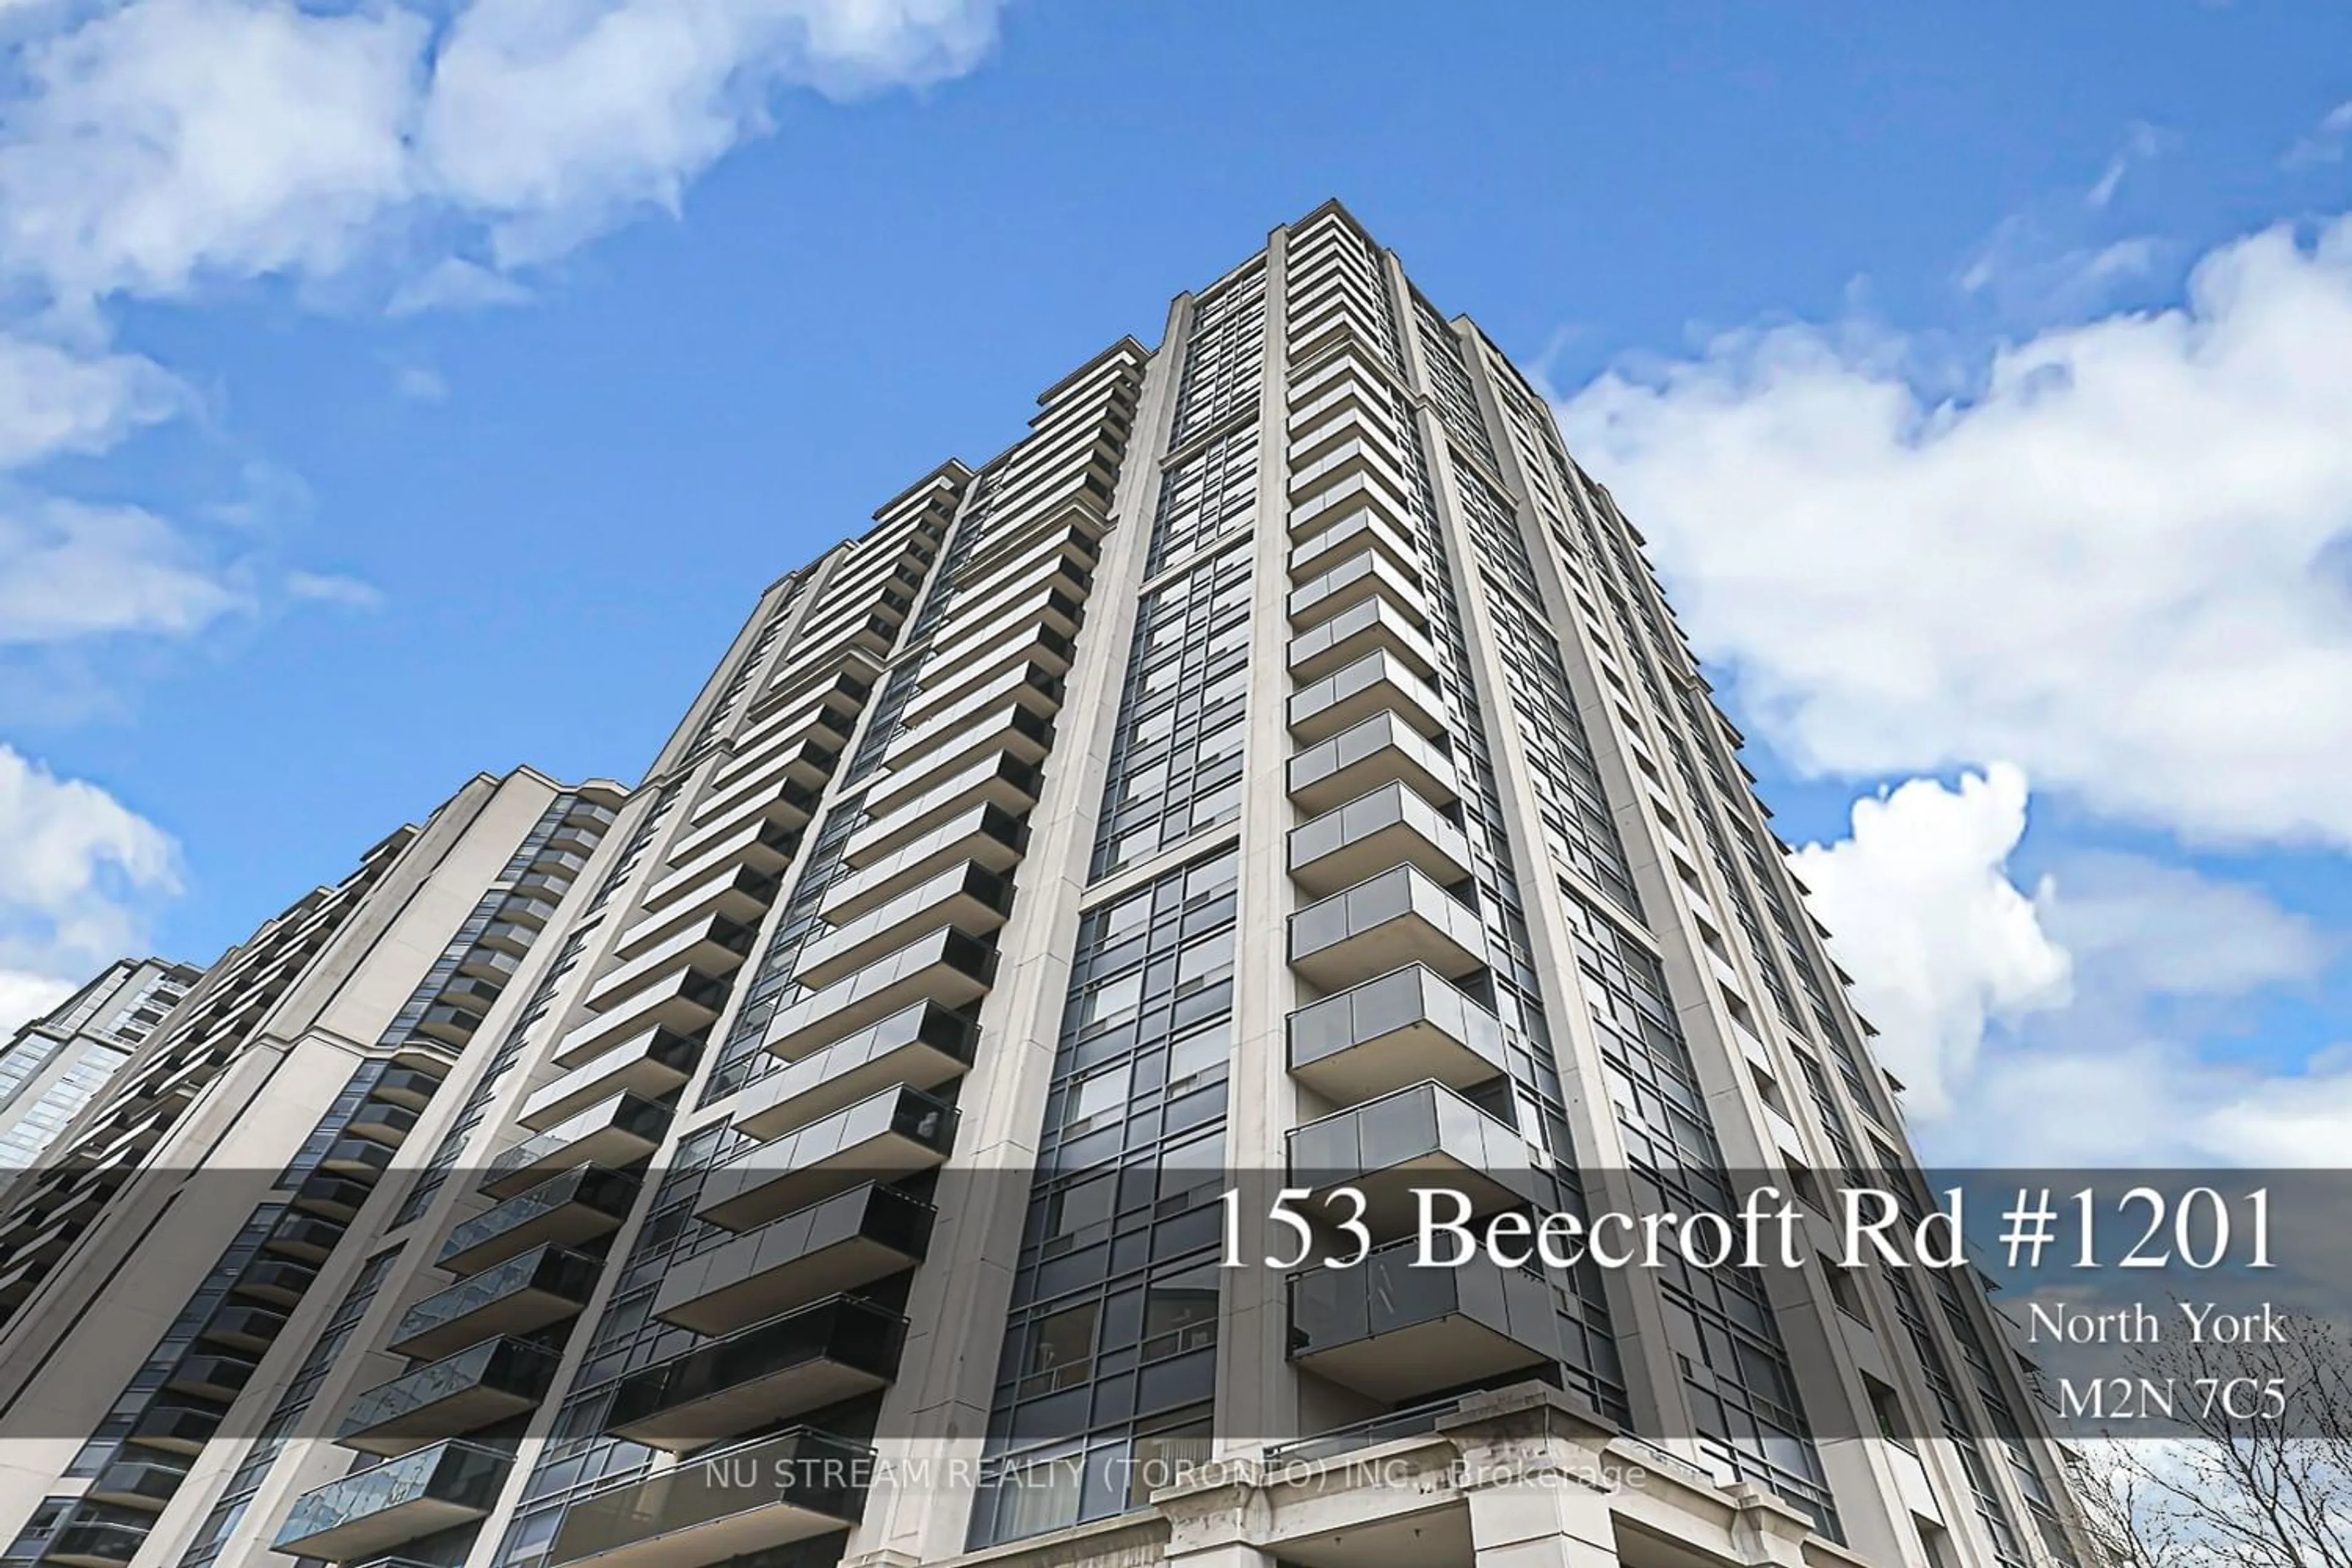 A pic from exterior of the house or condo for 153 Beecroft Rd #1201, Toronto Ontario M2N 7C5